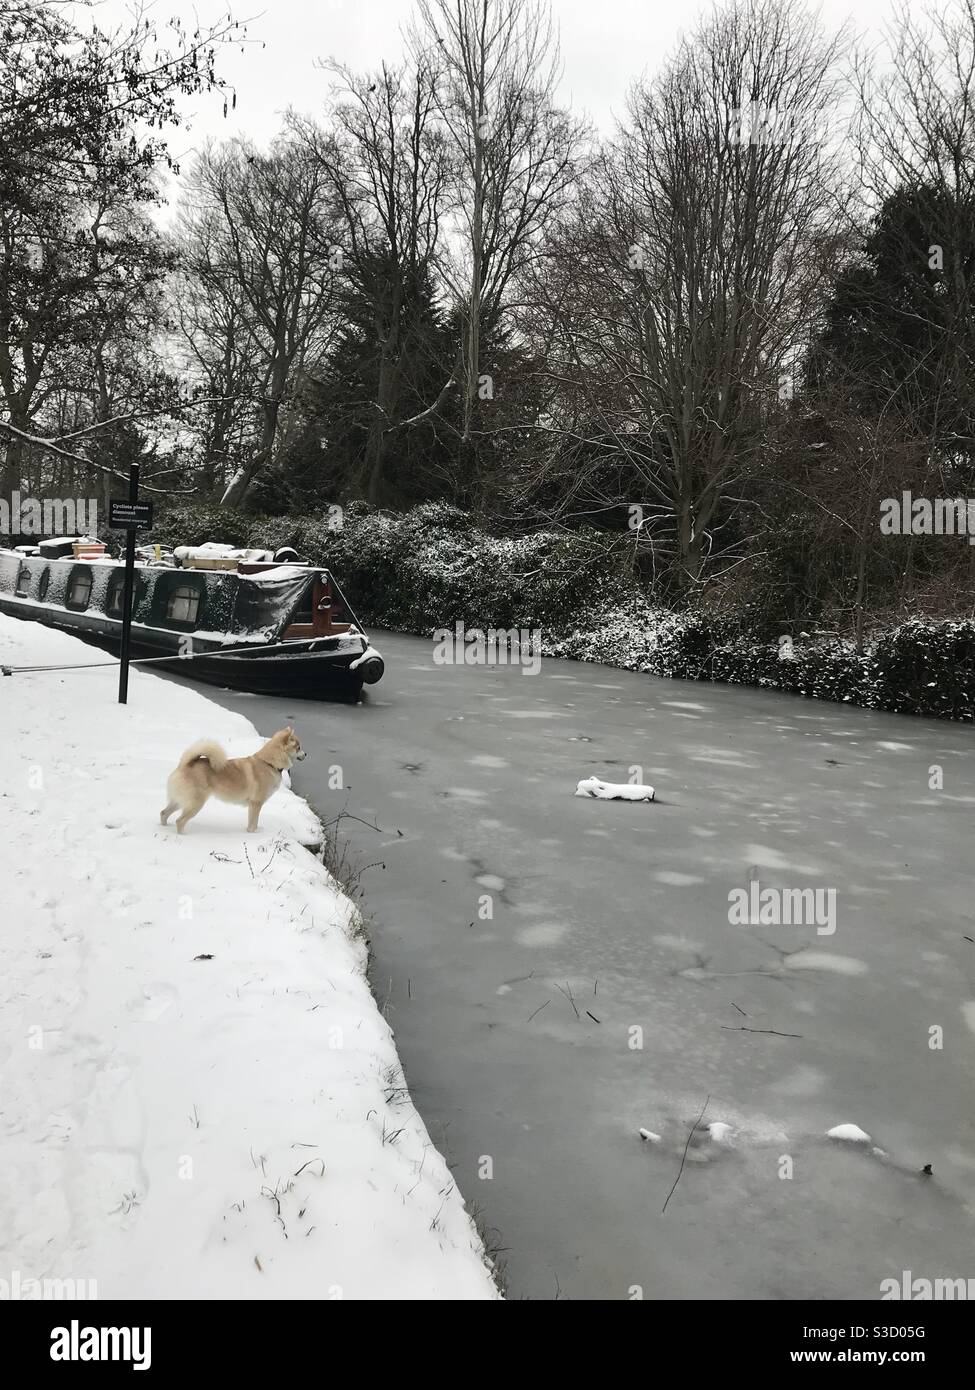 Snowy Oxford Canal. The Cherwell river frozen over during winter in Oxford, England. Stock Photo